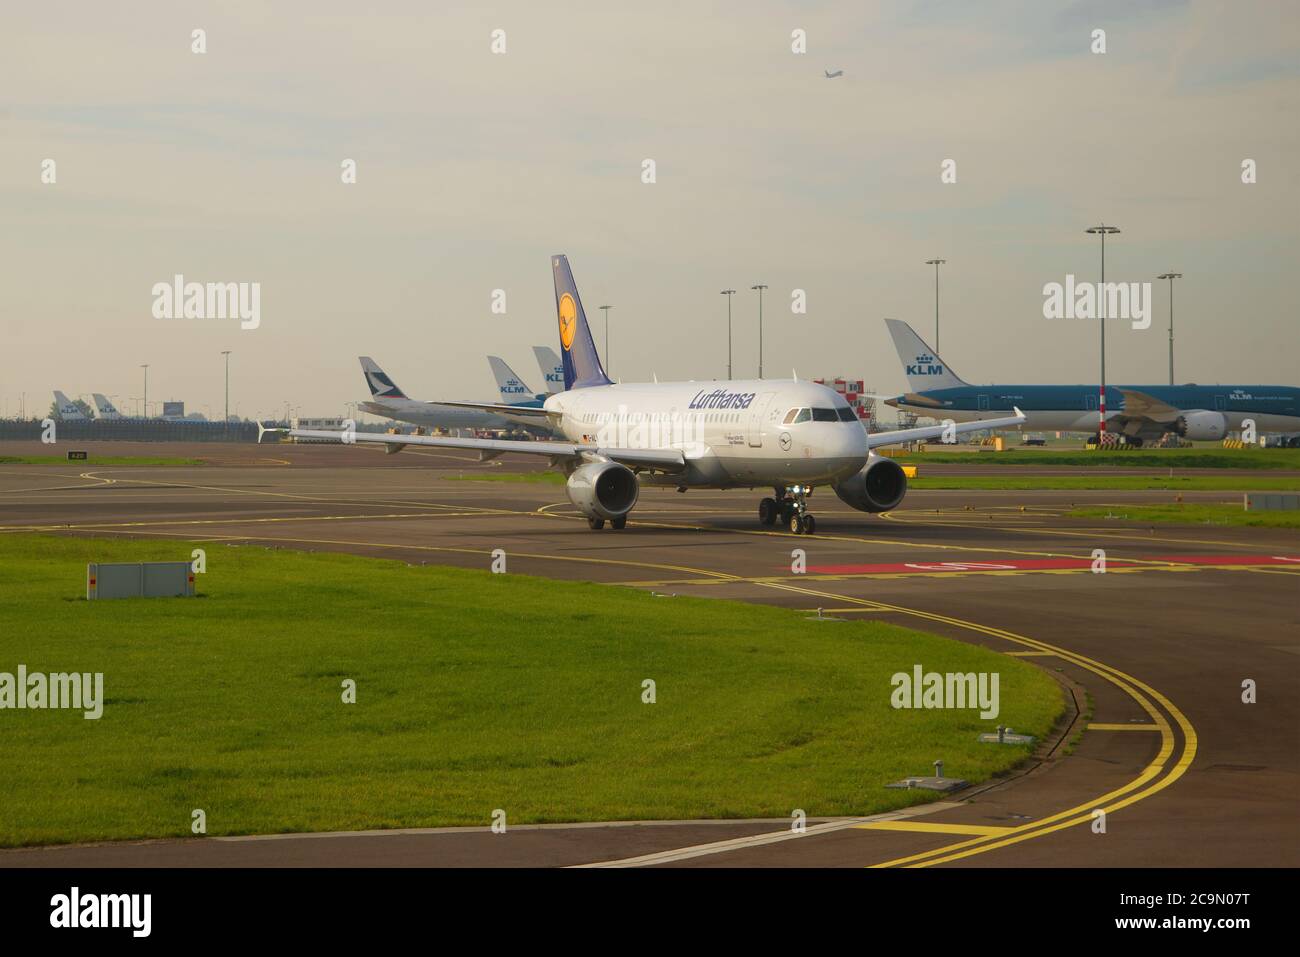 AMSTERDAM, NETHERLANDS - SEPTEMBER 17, 2017: The Airbus A319-114 (D-AILN) of Lufthansa airline on taxing at Schiphol Airport in the early September mo Stock Photo